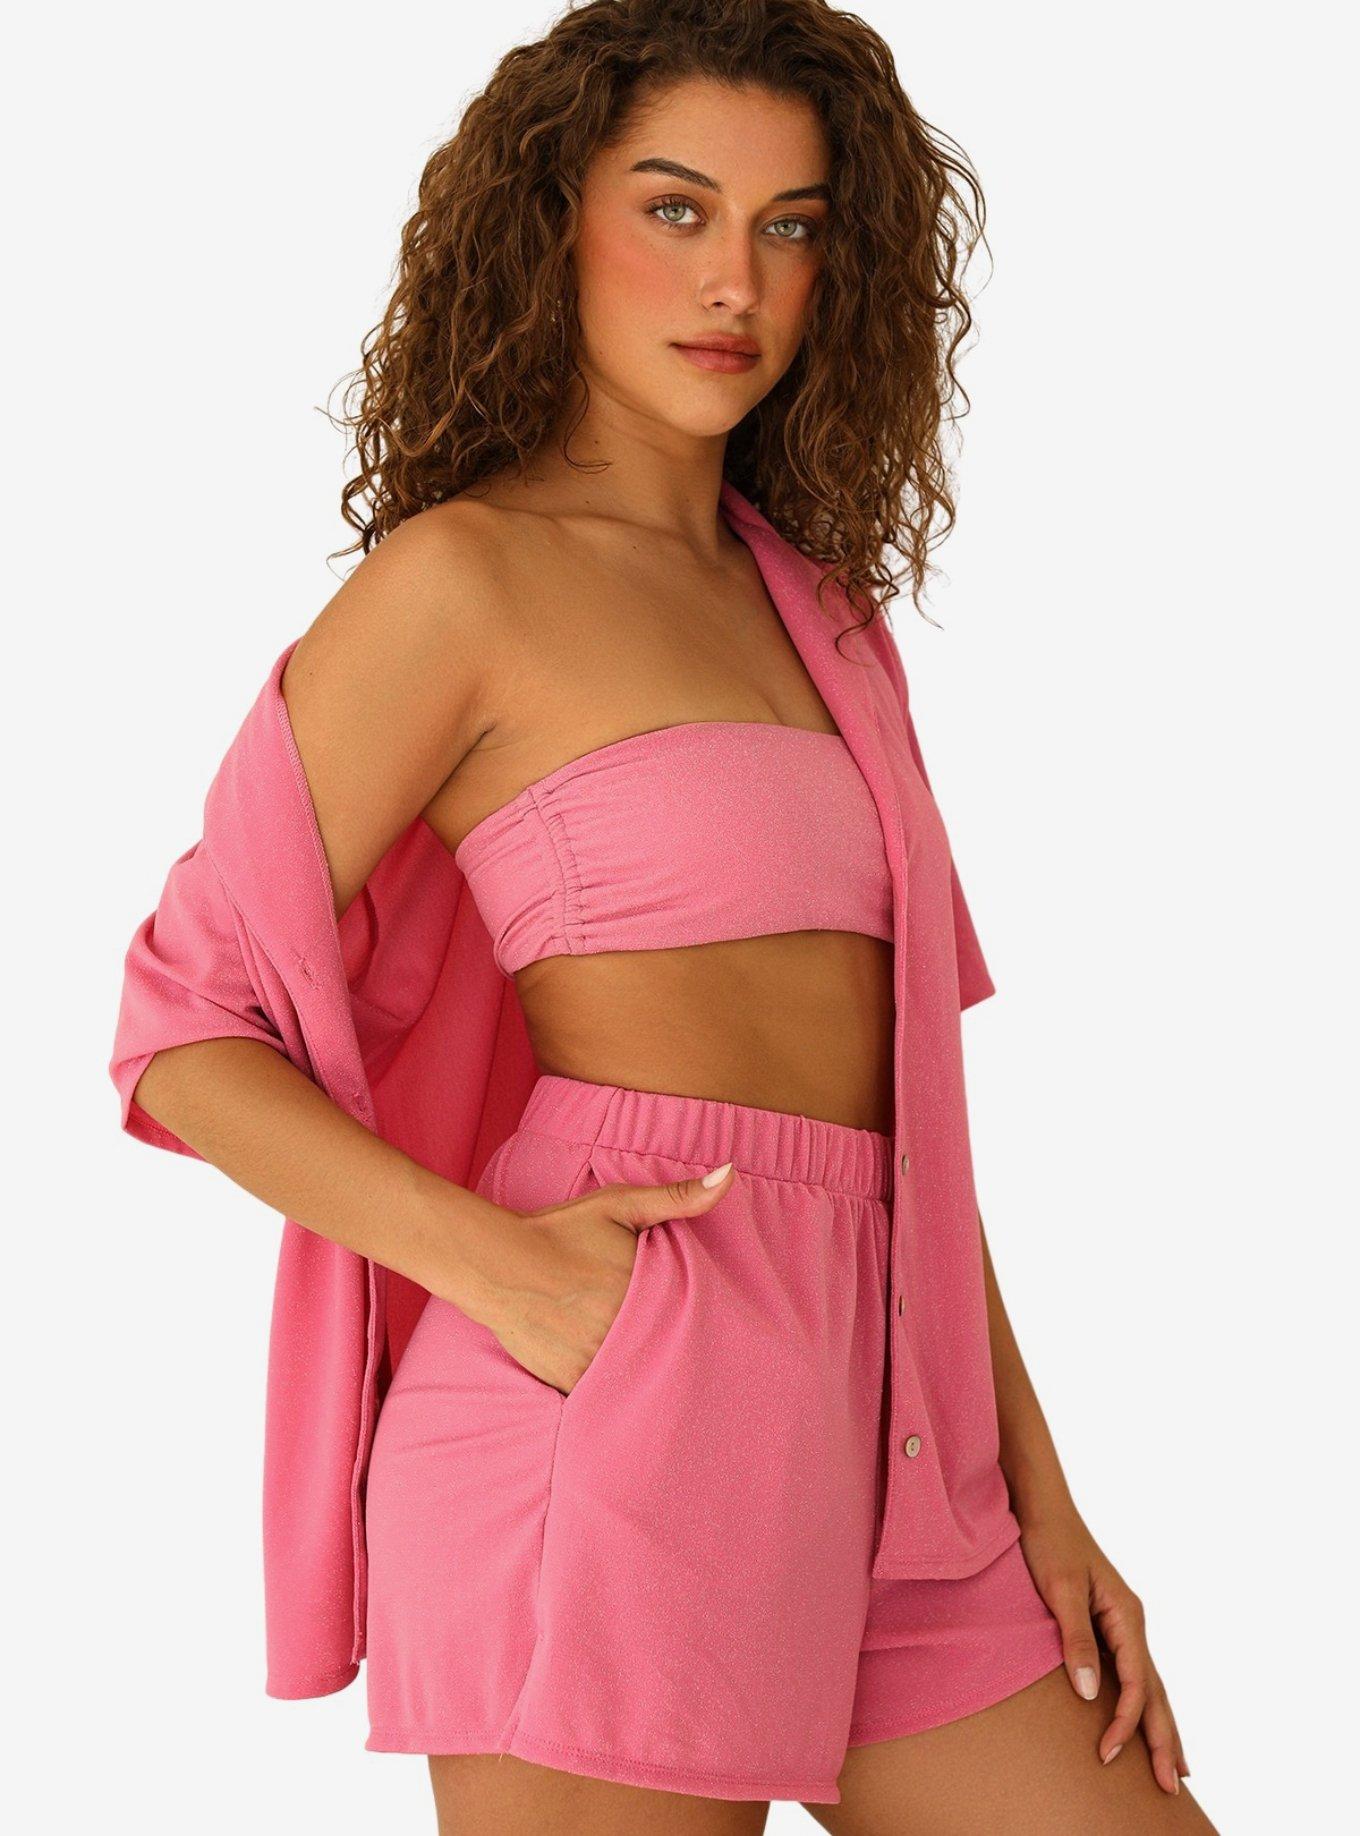 Dippin' Daisy's Mary-Kate Swim Top Cover-Up Candy Sparkle, PINK, hi-res